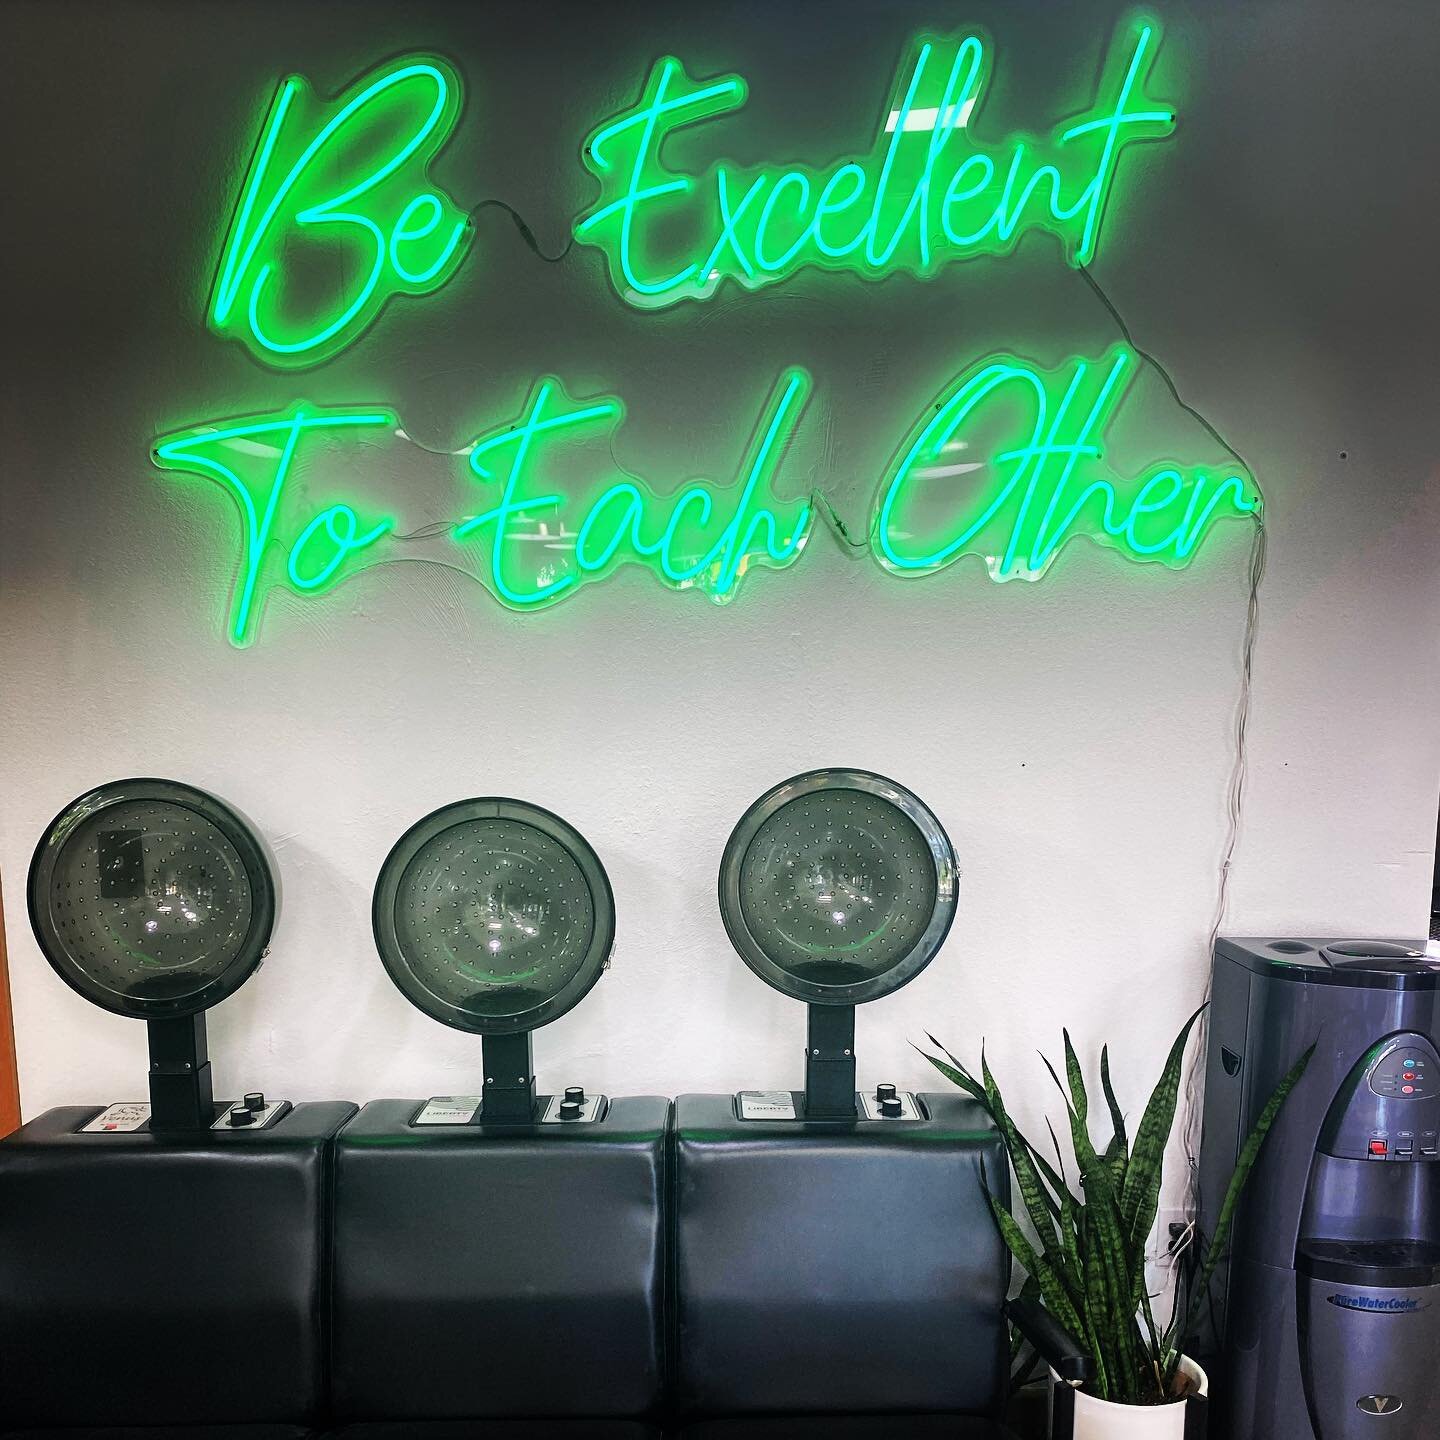 Decided to put a little neon up since some of you need a reminder. 

#billandted #bekind #beexcellenttoeachother #behelpful #nohatejustlove #wyldstallyns #wyldstallynsrule